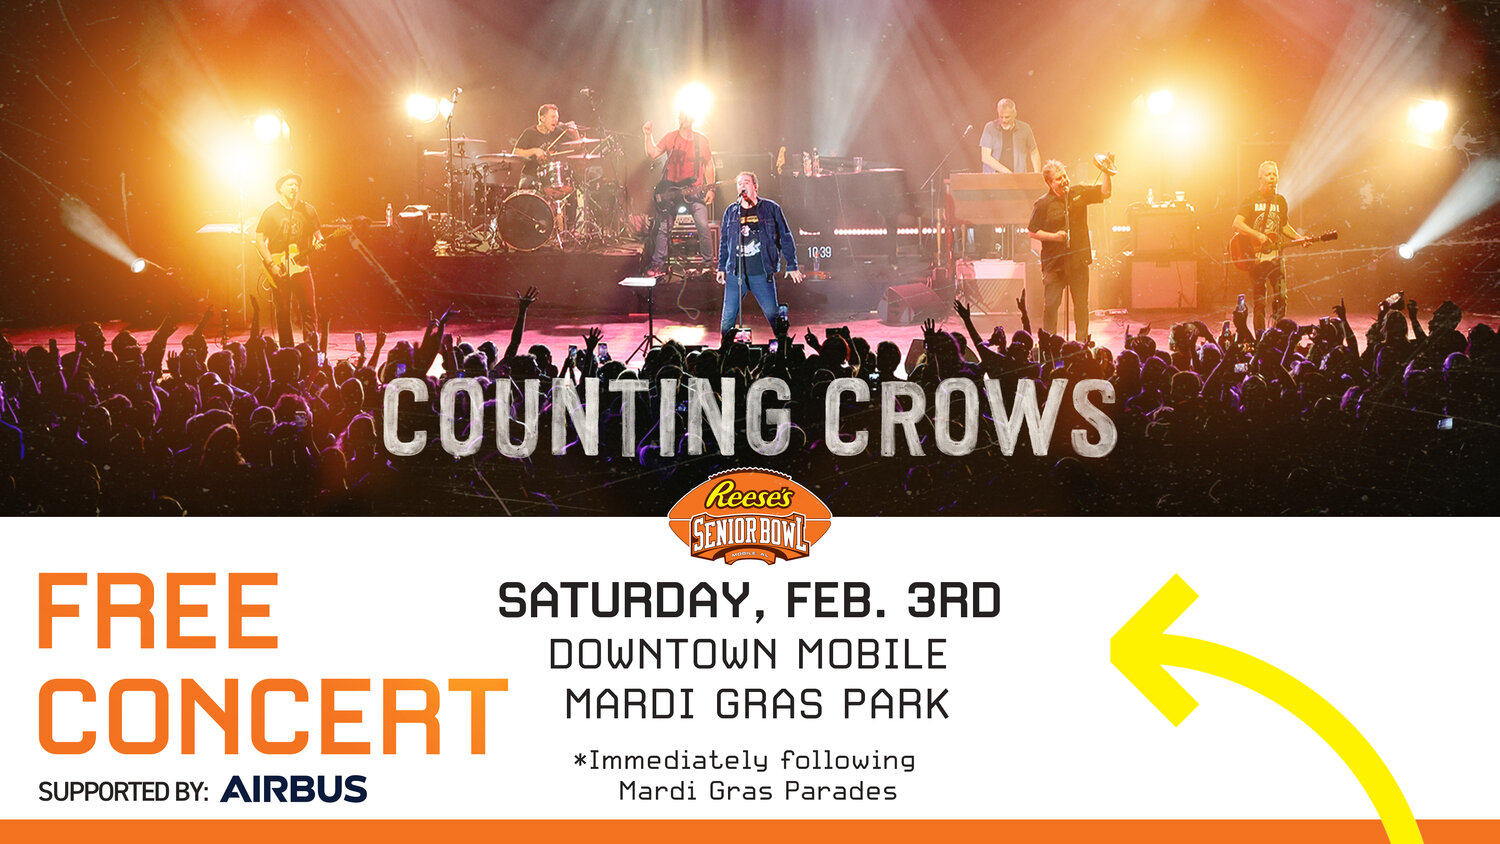 The Counting Crows will take the stage at Mardi Gras Park in downtown Mobile after the evening’s carnival parades conclude around 8:30 p.m. on Feb. 3, 2024. Previous Senior Bowl concerts have taken place on Friday night of game week; however, this year’s free event has been moved to Saturday to accommodate the Senior Bowl 75th Anniversary Legends Gala.